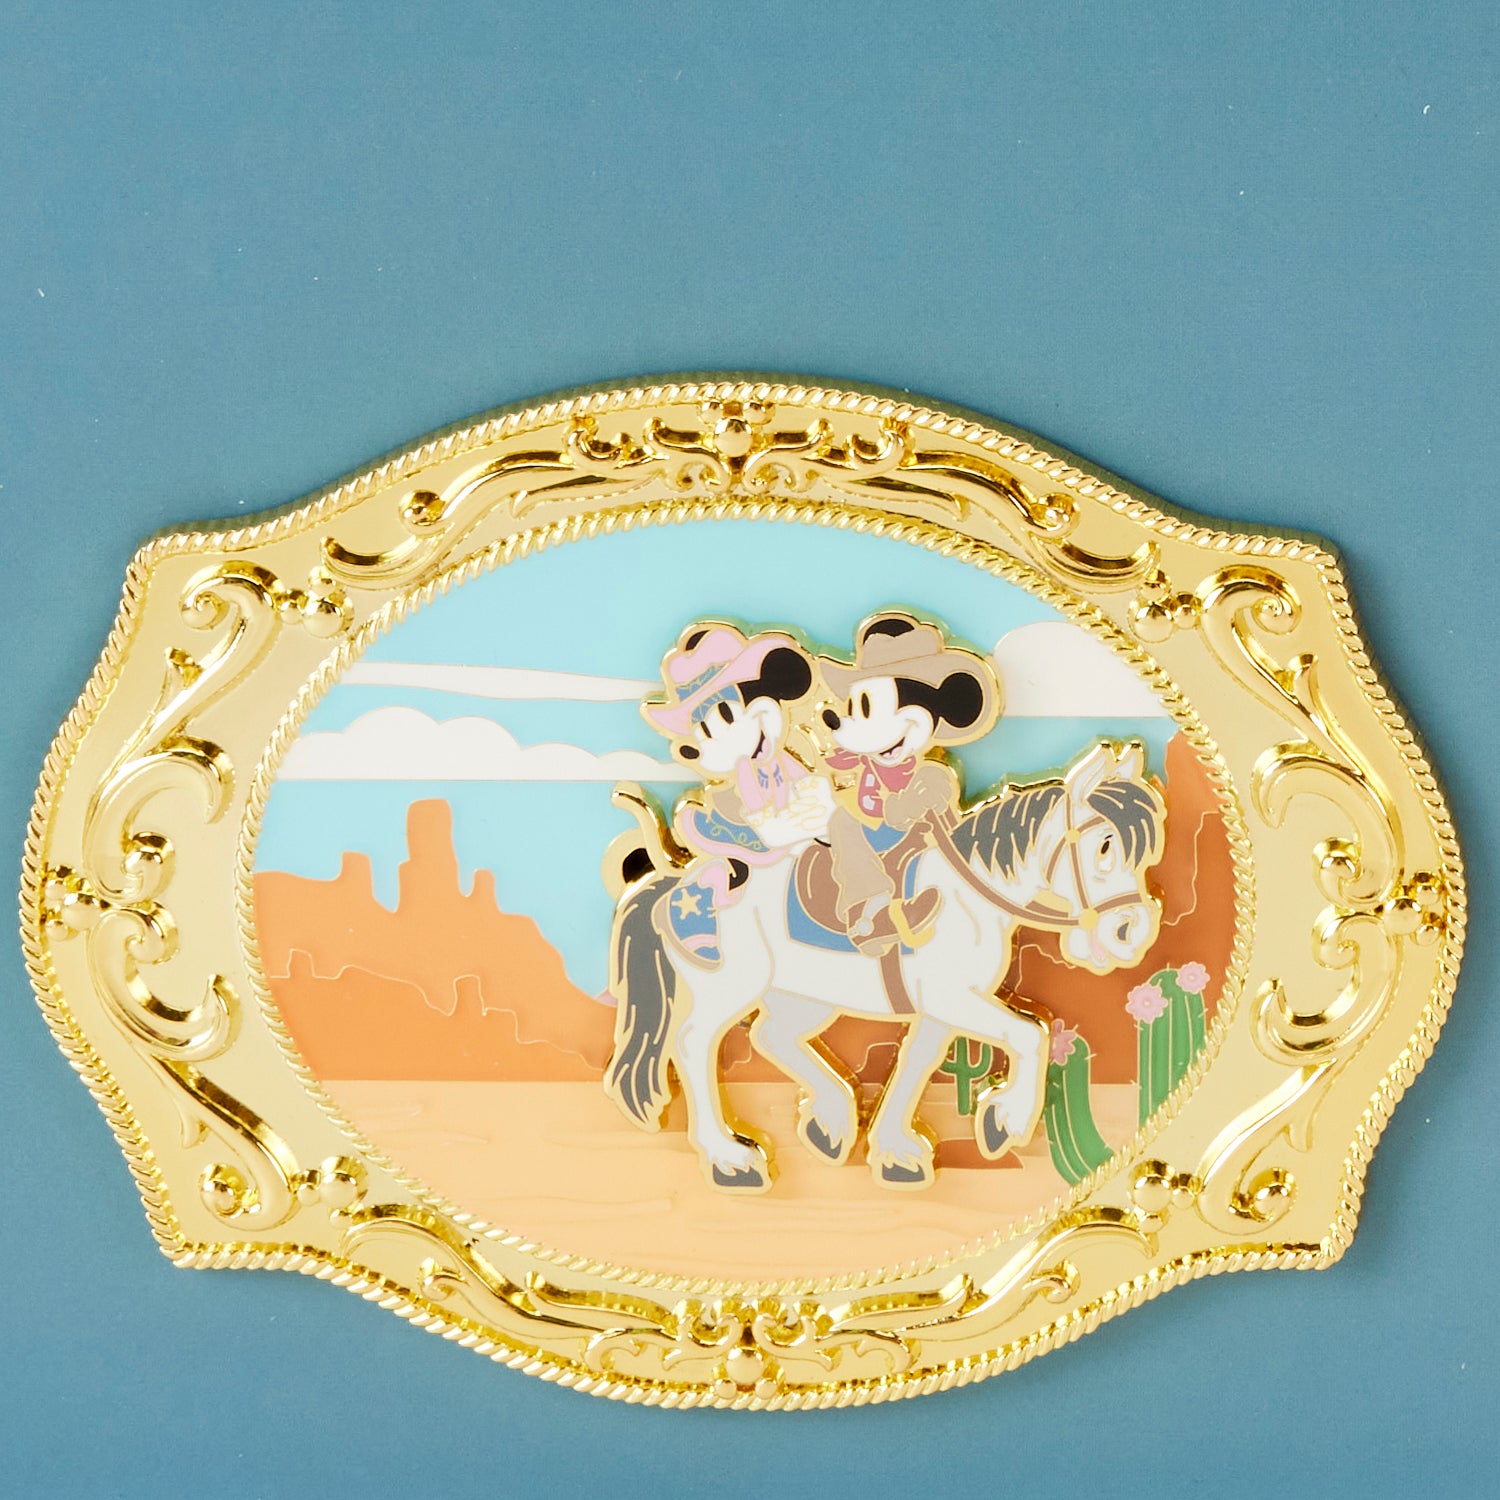 Loungefly x Disney Western Mickey and Minnie Mouse Belt Buckle 3 Inch Pin